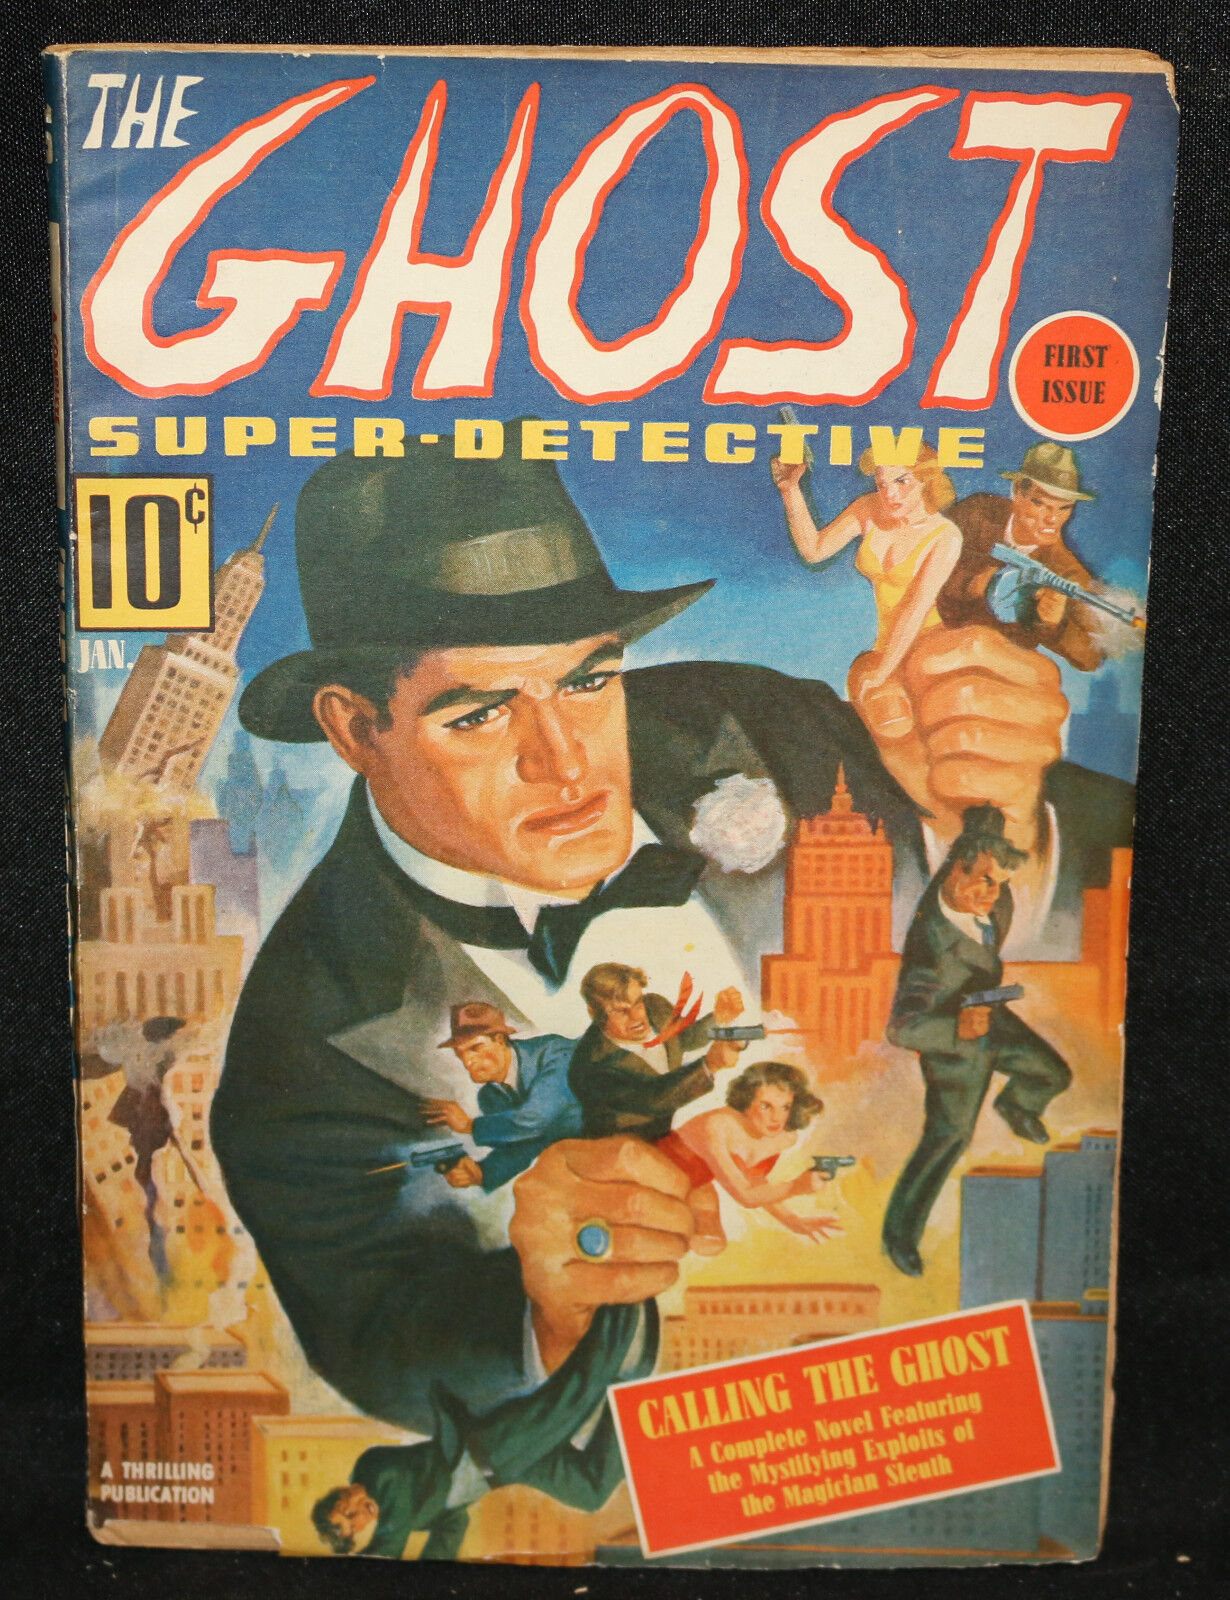 Ghost Super-Detective Vol. 1 #1 Pulp - Calling the Ghost (VF+ / F) January, 1940